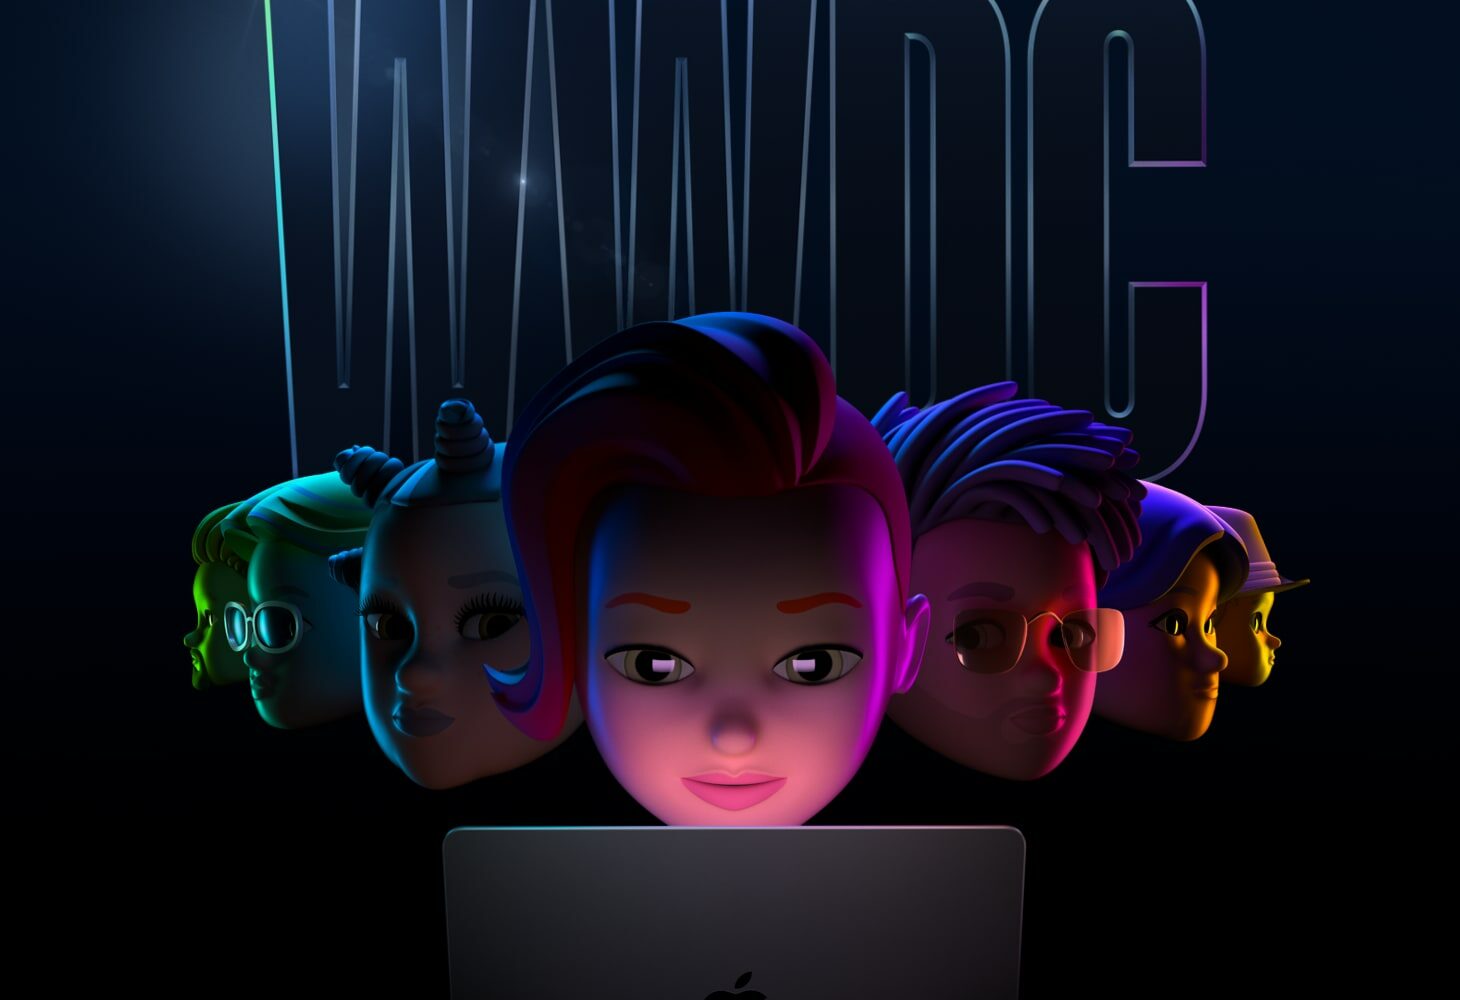 Marketing image showing developer Memojis gathered around a notebook, set against a dark background with "WWDC" printed on it